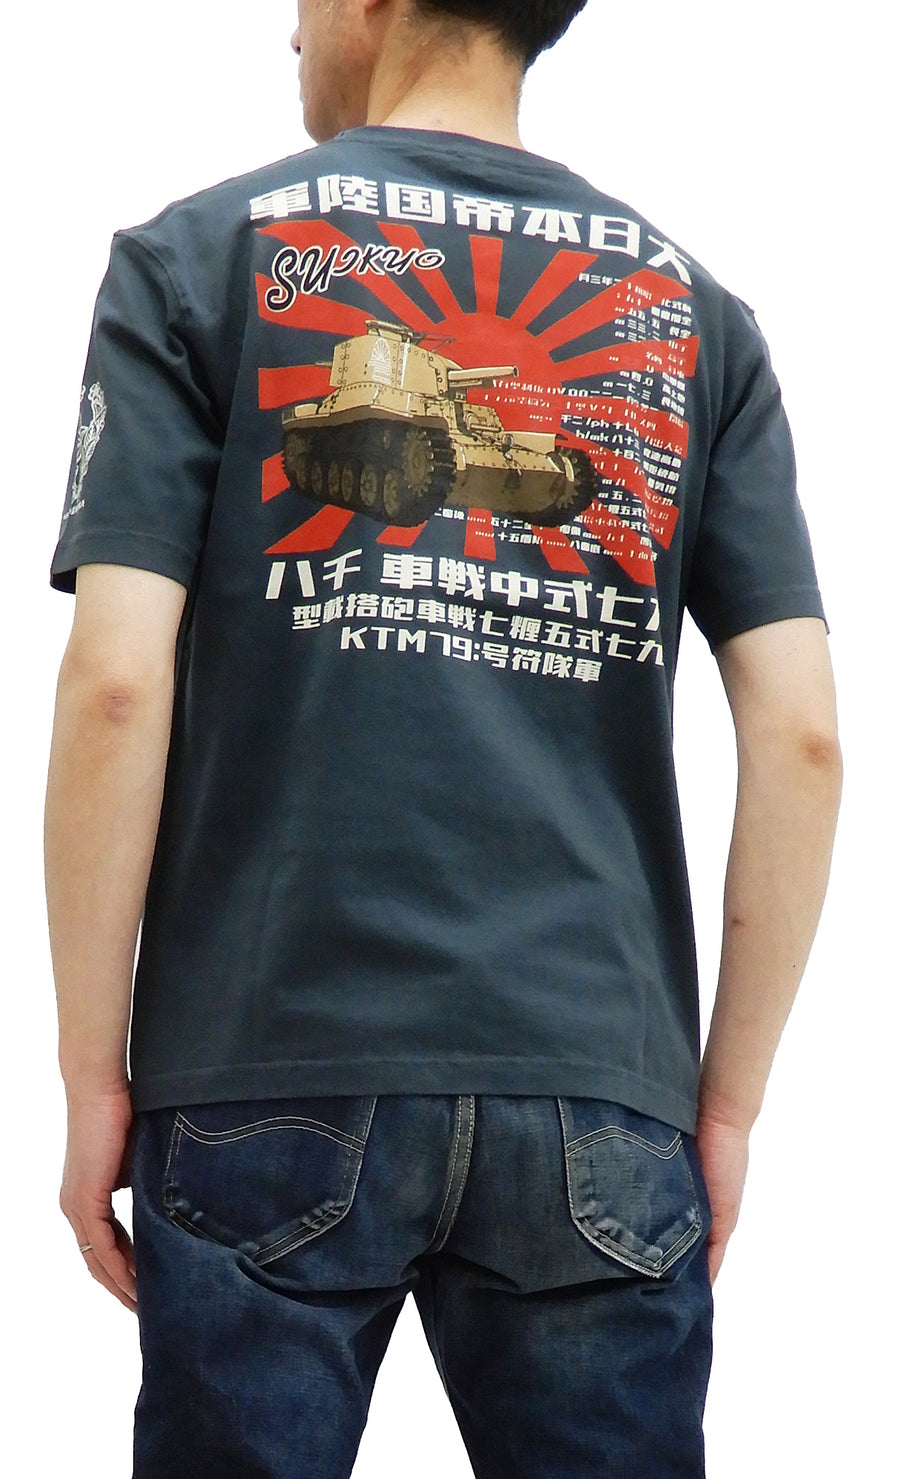 Suikyo T-Shirt Men's Japanese Military Tank Graphic Short Sleeve Tee SYT-191 Faded-Navy-Blue